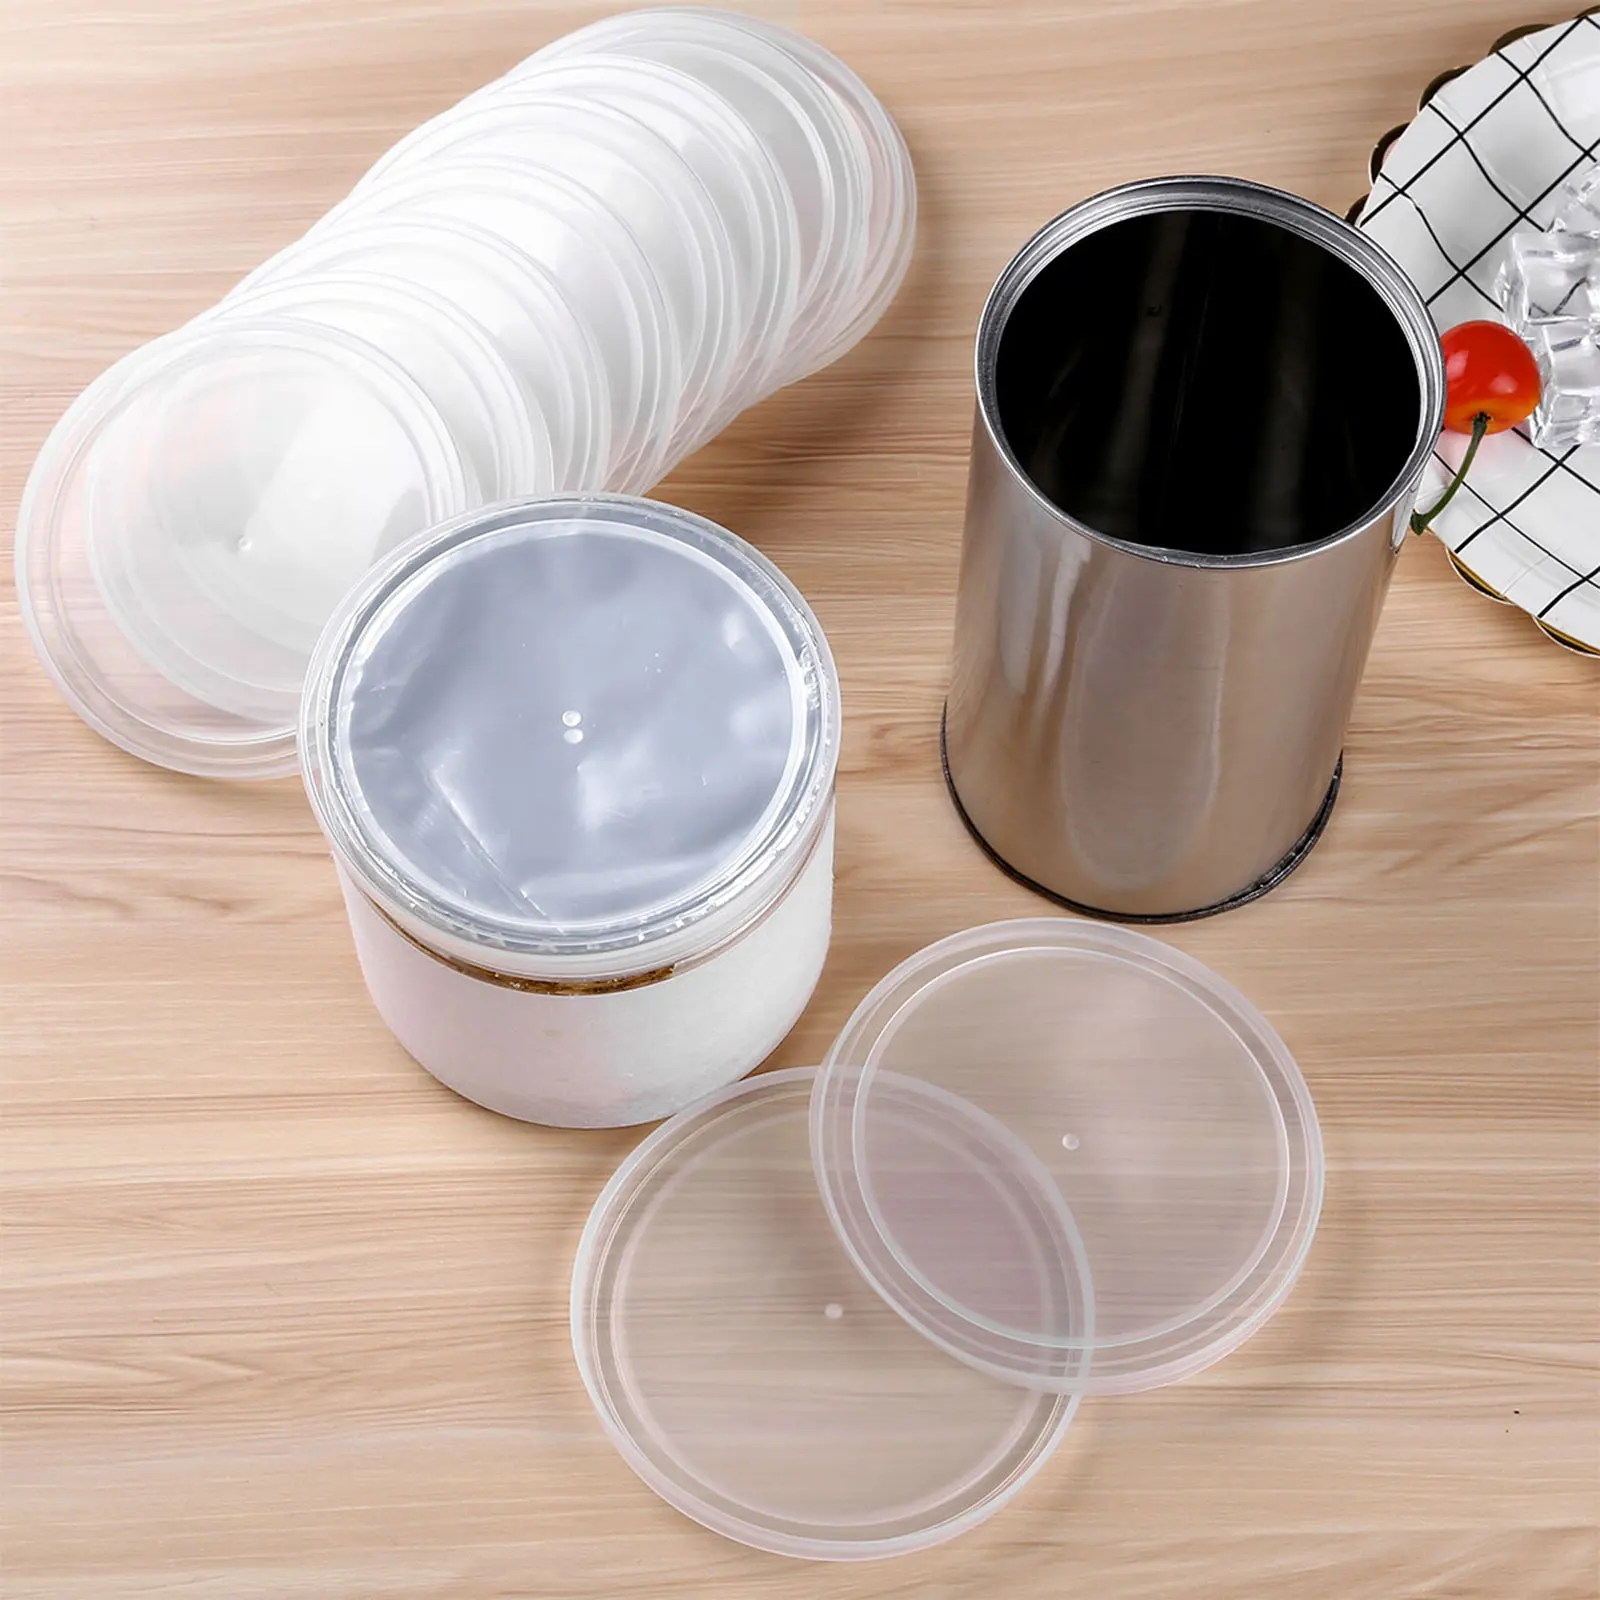 12 Pcs Reusable Plastic Tight Seals Can Covers Lids Large Medium And Small for Canned Goods Or Pet Dog Cat Food Saver